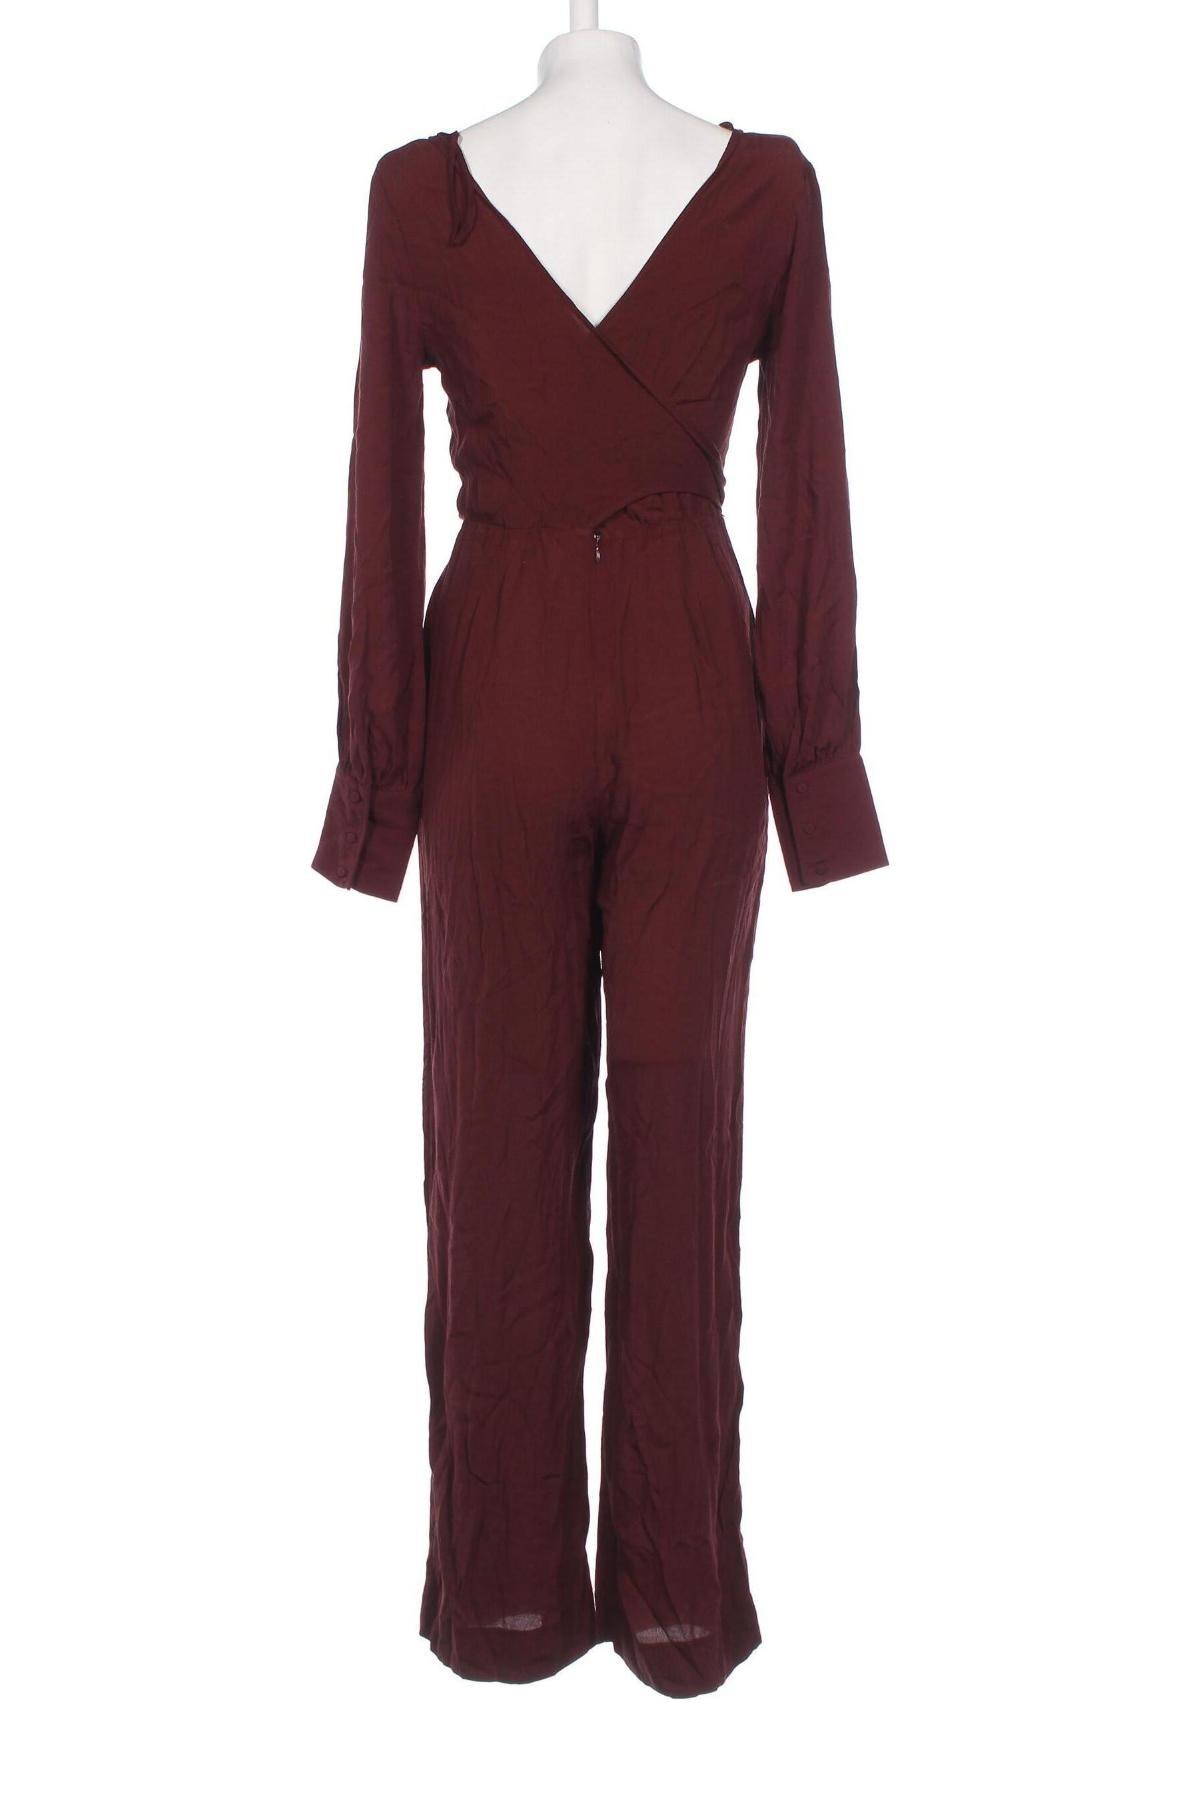 Damen Overall & Other Stories, Größe S, Farbe Rot, Preis € 53,37